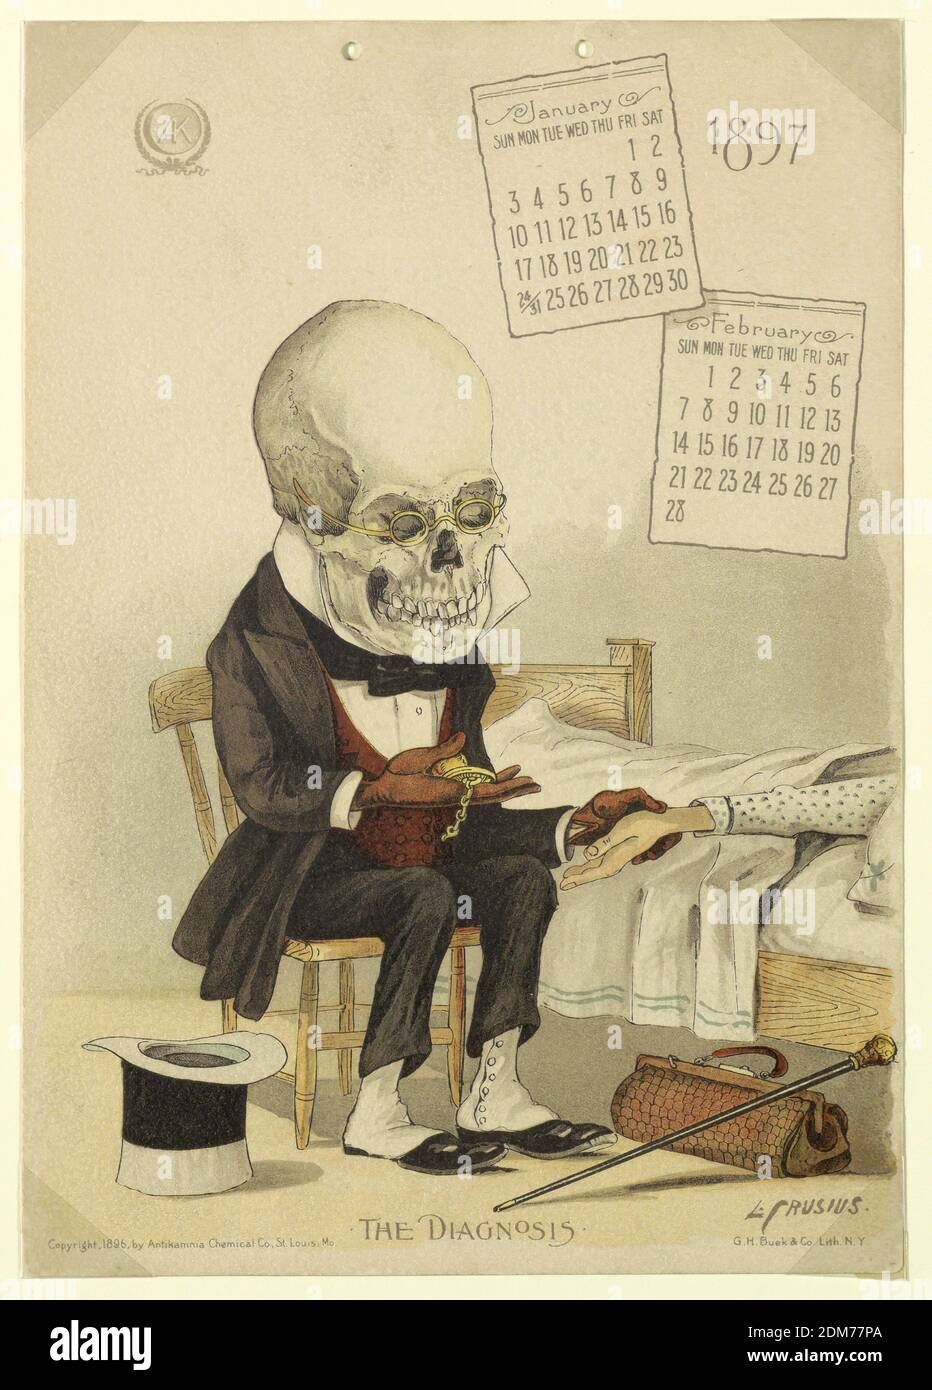 The Antikamnia Calendar, January and February, 1897: The Diagnosis, Louis Crusius, American, 1862 - 1898, Louis Crusius, American, 1862 - 1898, Chromolithograph on paper with string binding, January and February, 1897., New York, New York, USA, 1896, graphic design, Calendar, Calendar Stock Photo